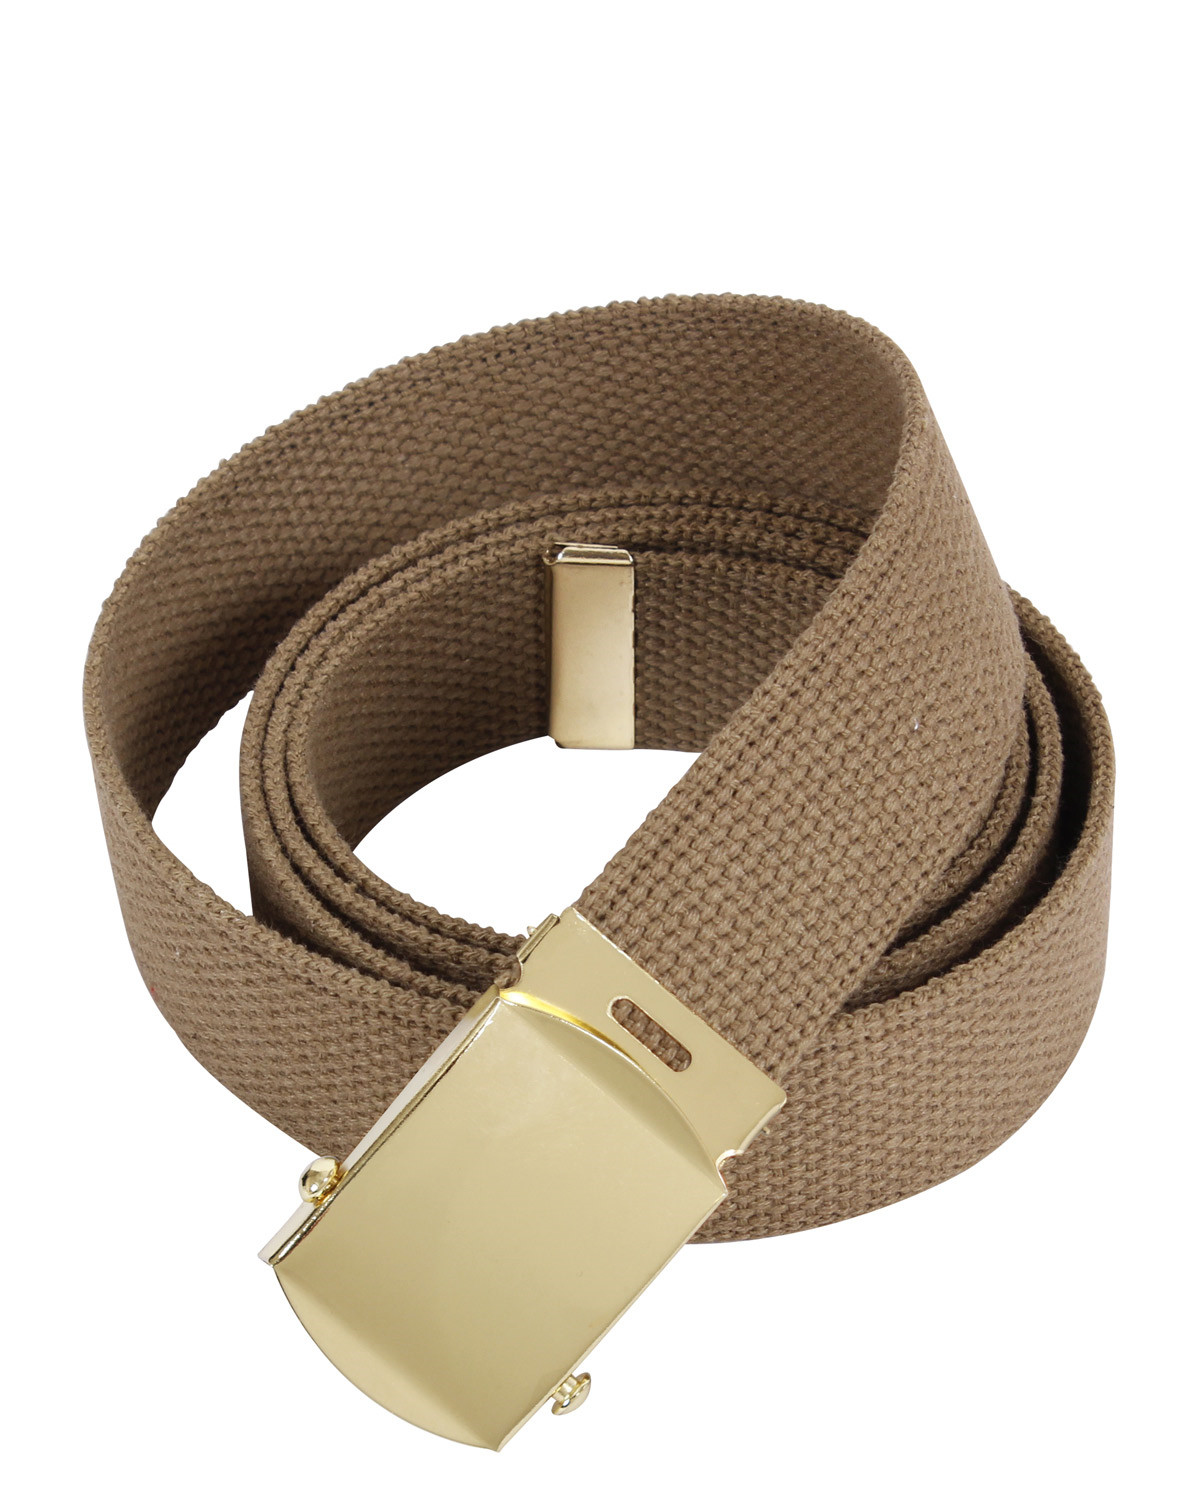 Rothco Military Bælte - 135 cm (Coyote Brown m. Guld Spænde, One Size)